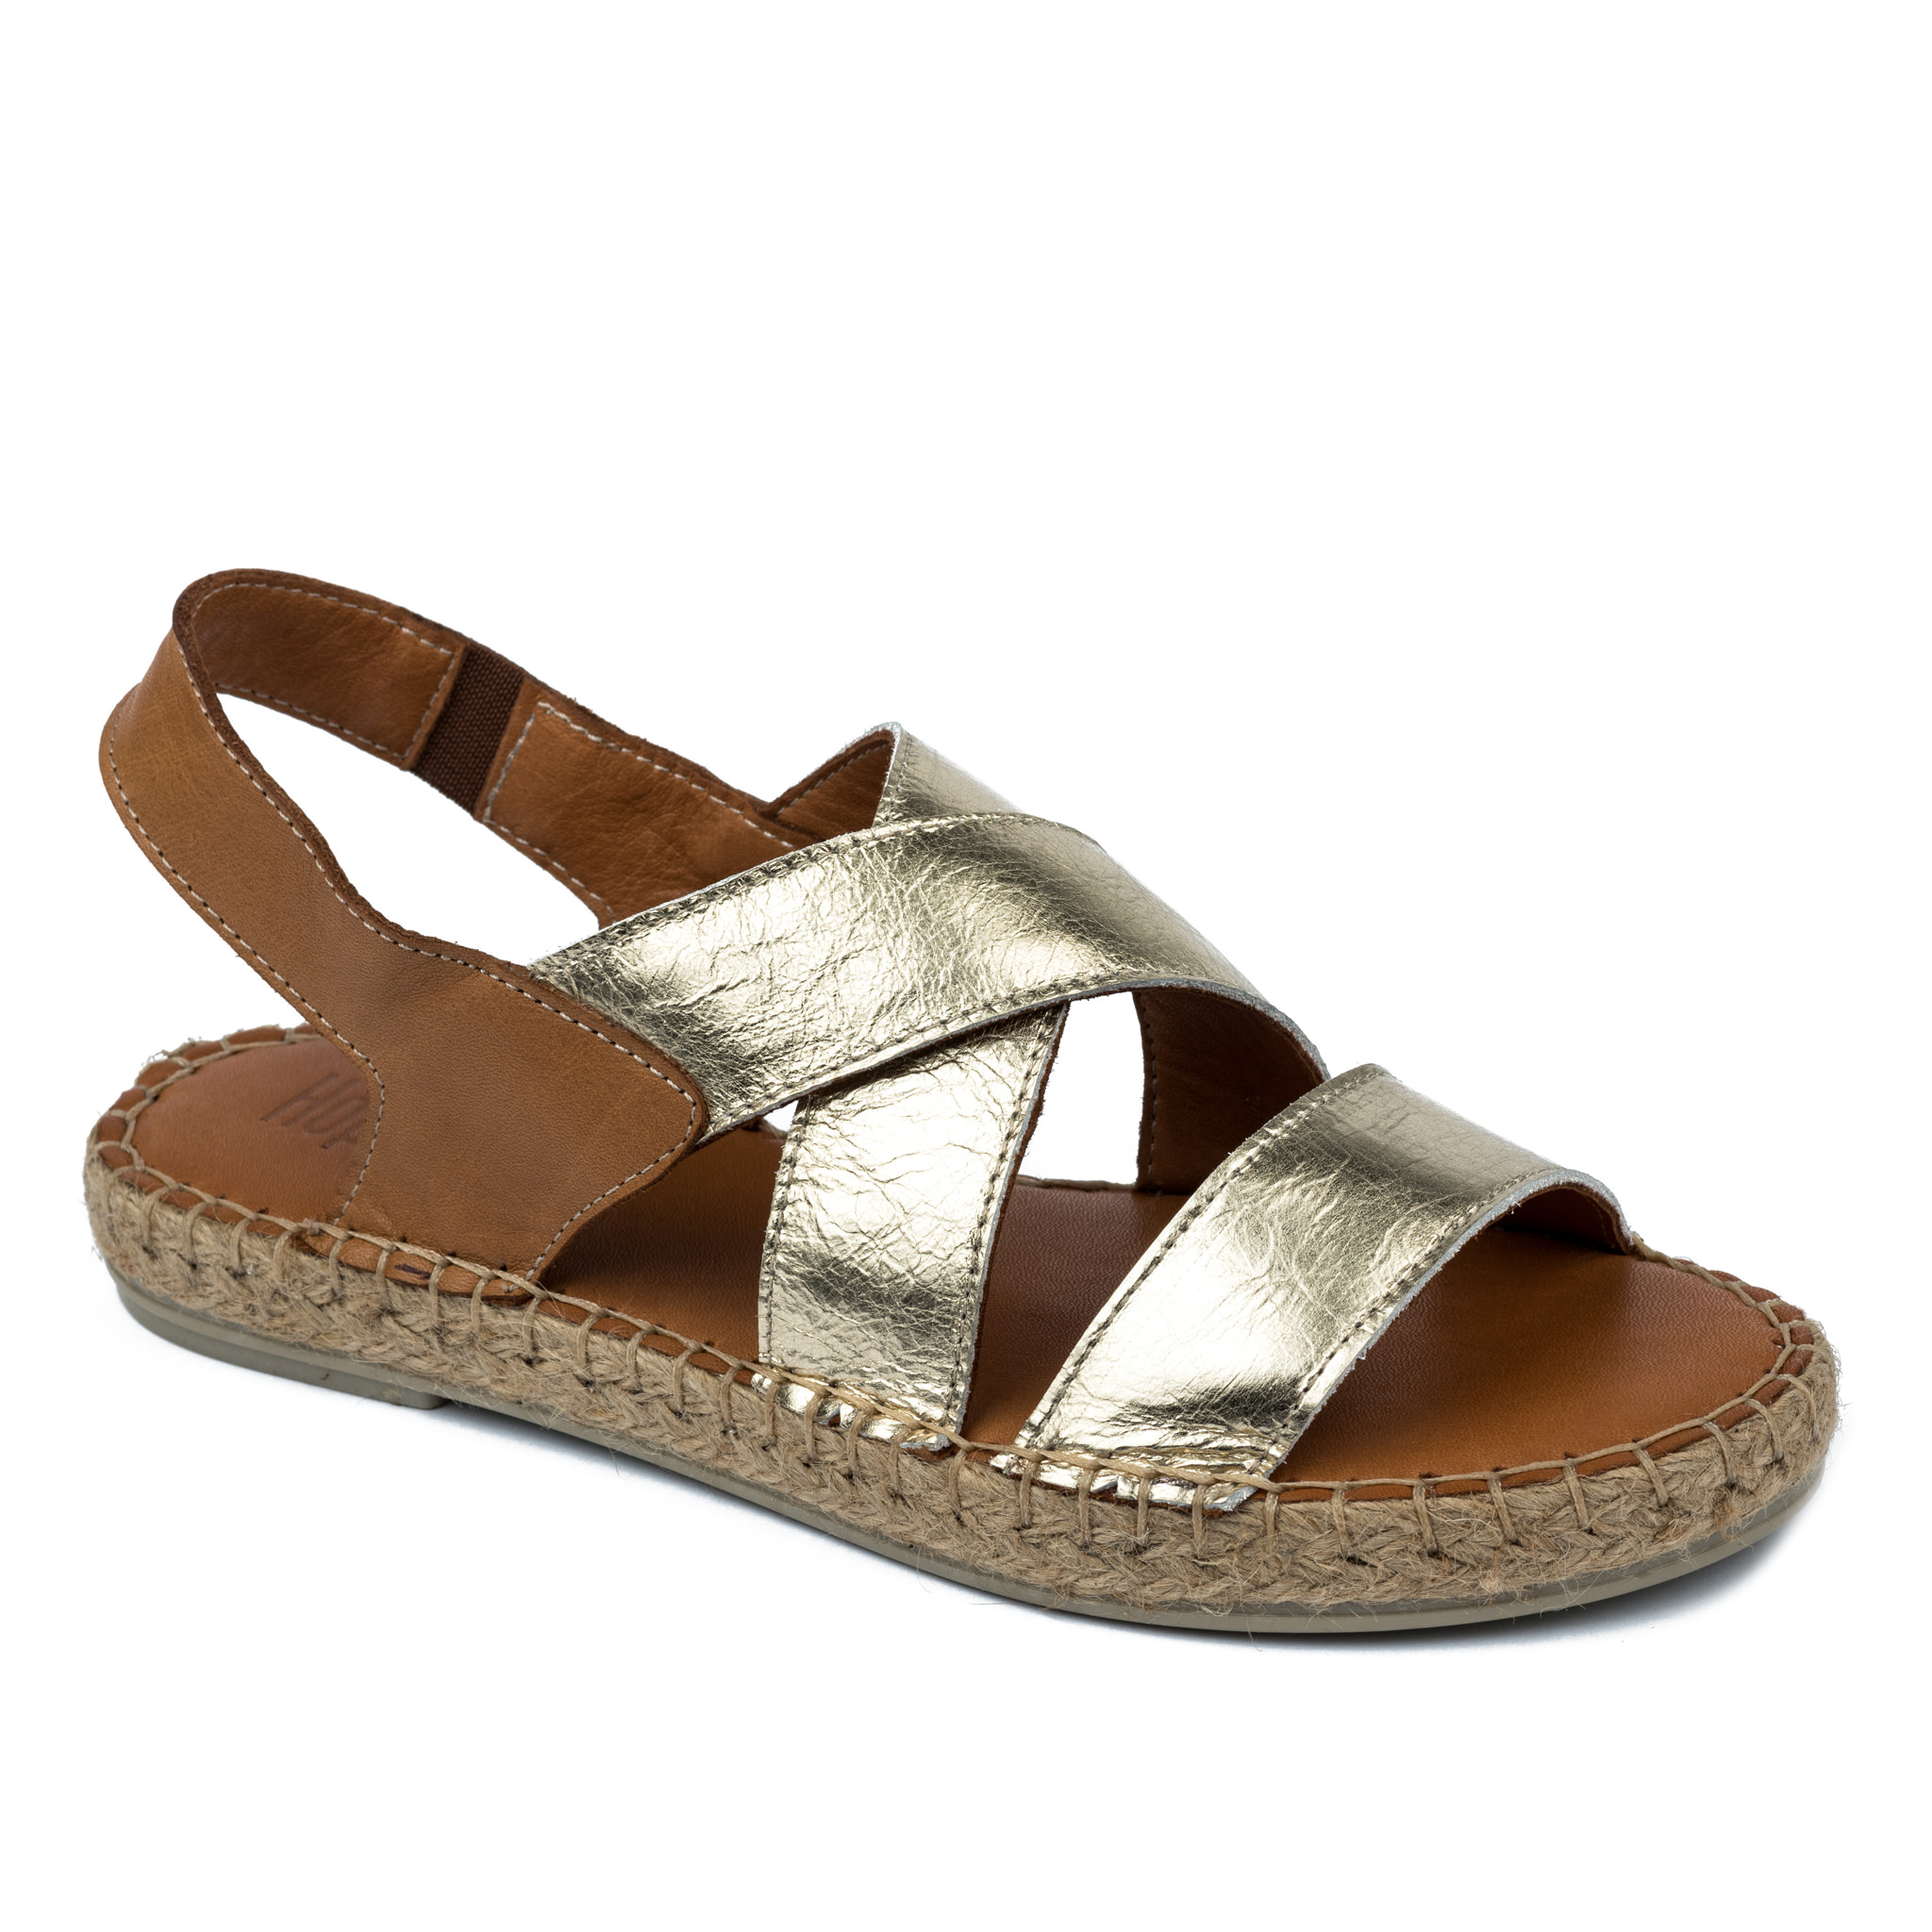 Leather espadrilles A586 - GOLD